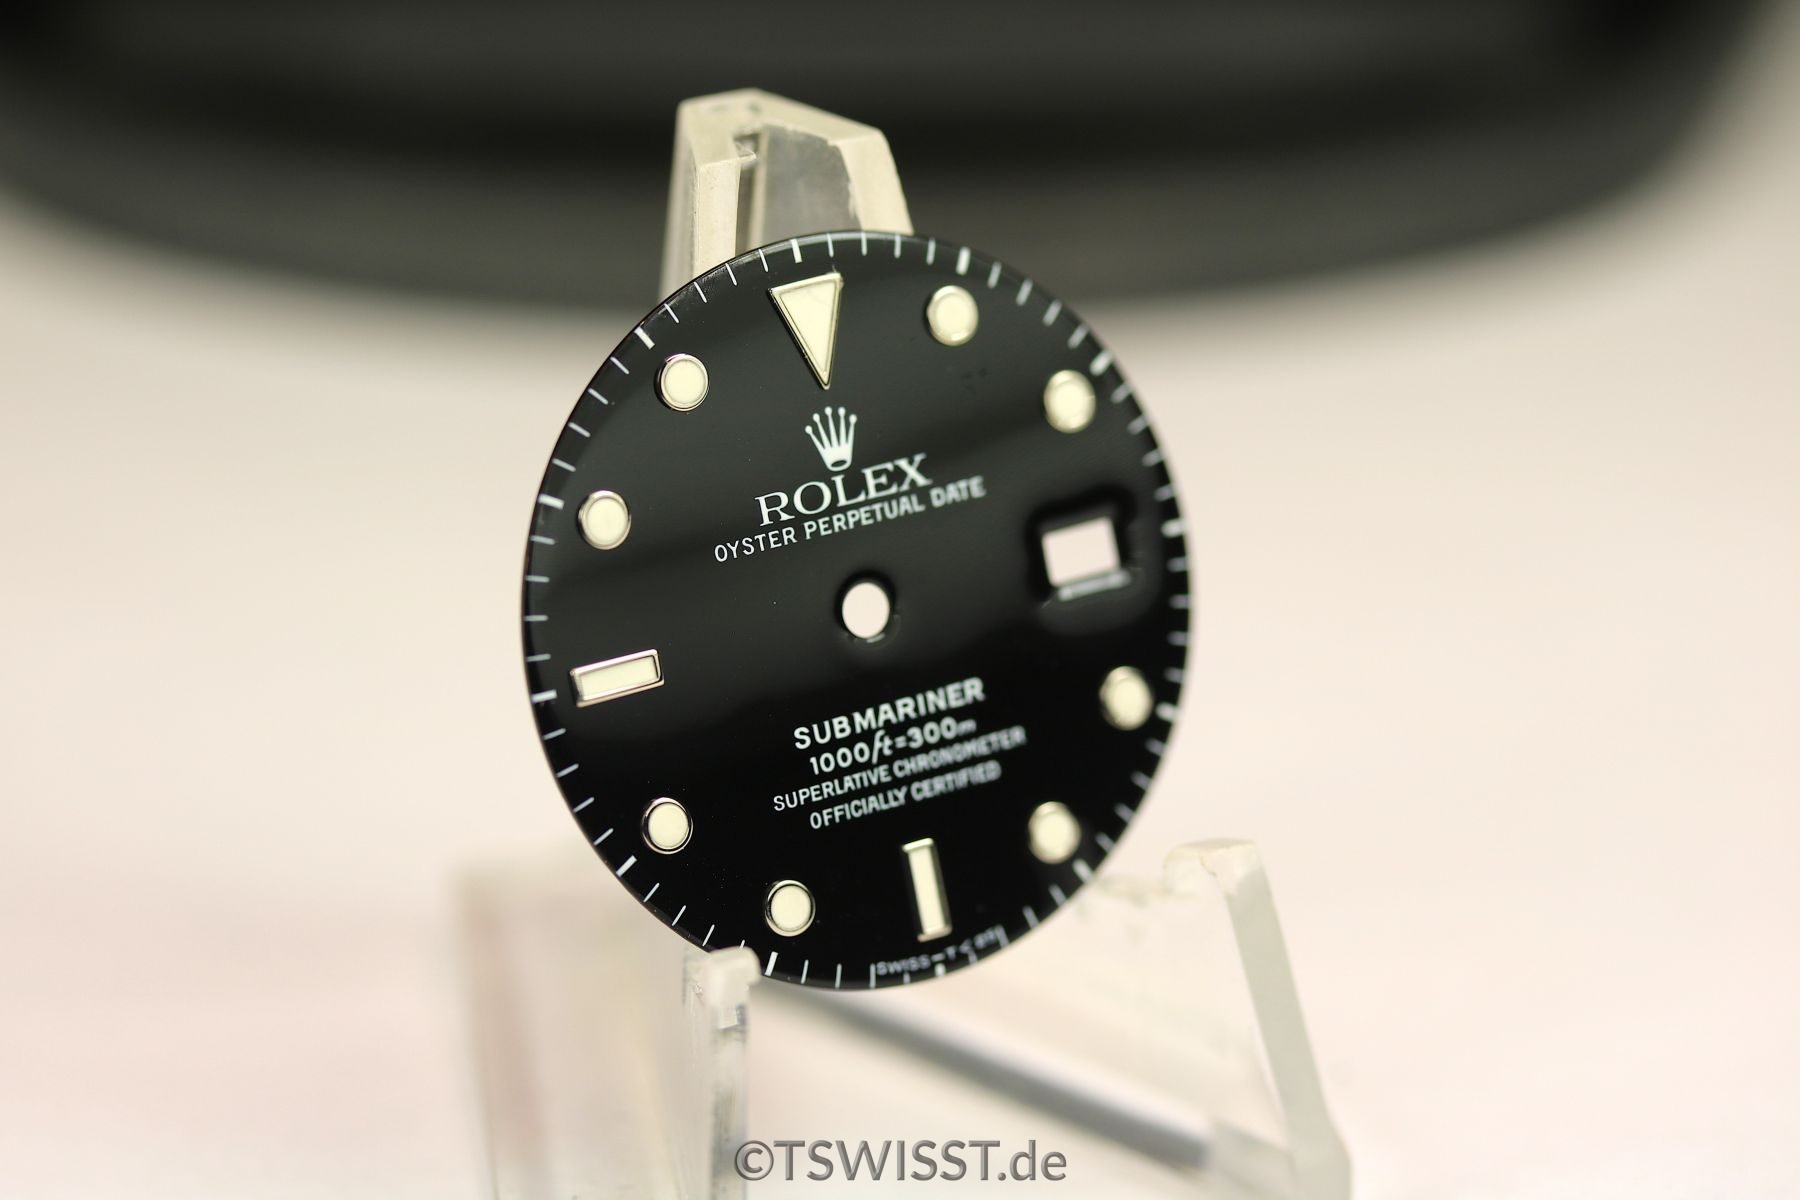 Rolex Submariner dial and inlay